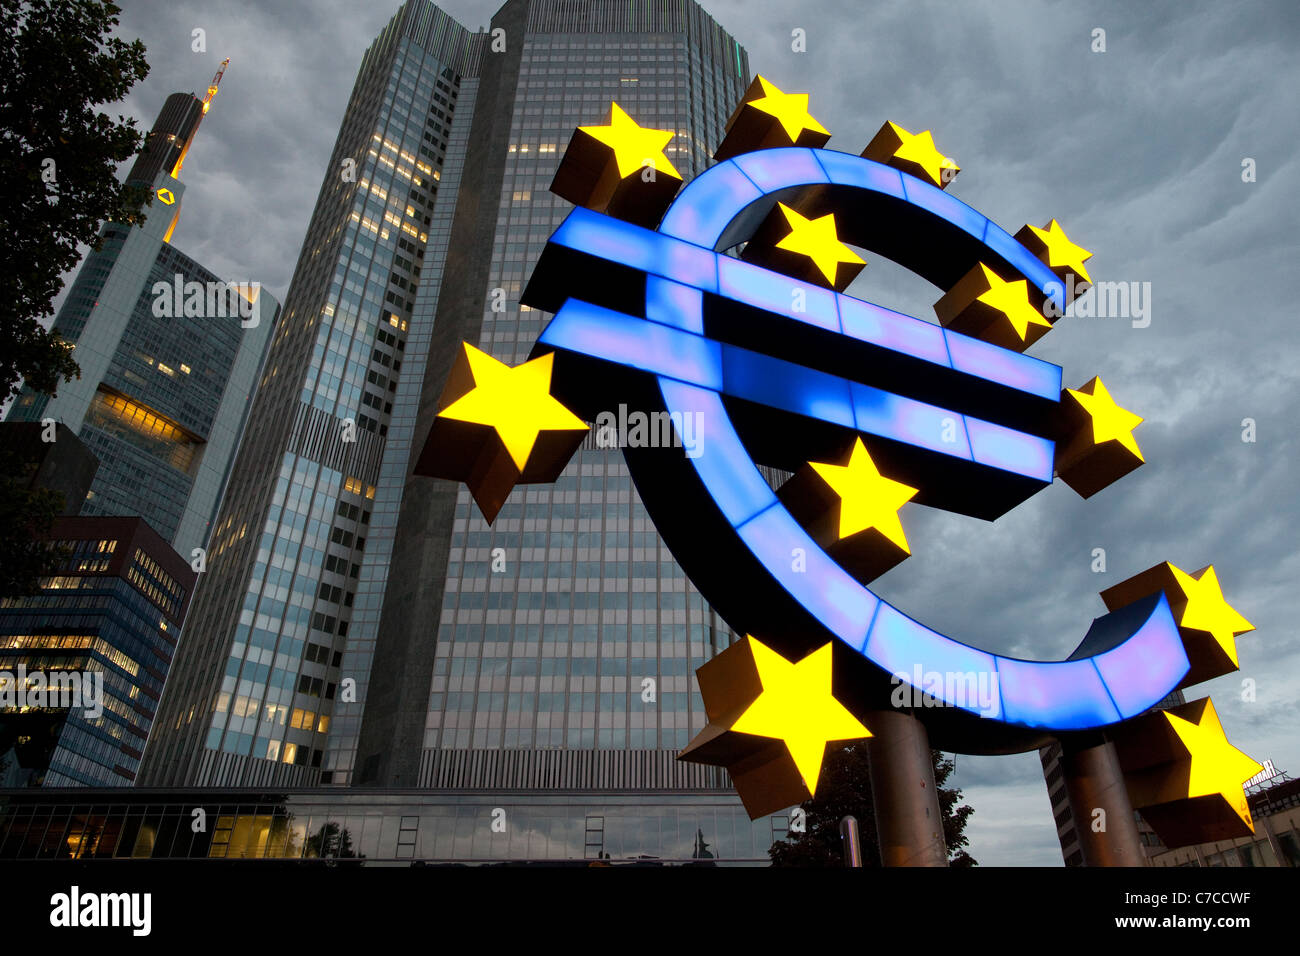 The Euro sign, the official currency of the Eurozone in the European Union. Photo:Jeff Gilbert Stock Photo